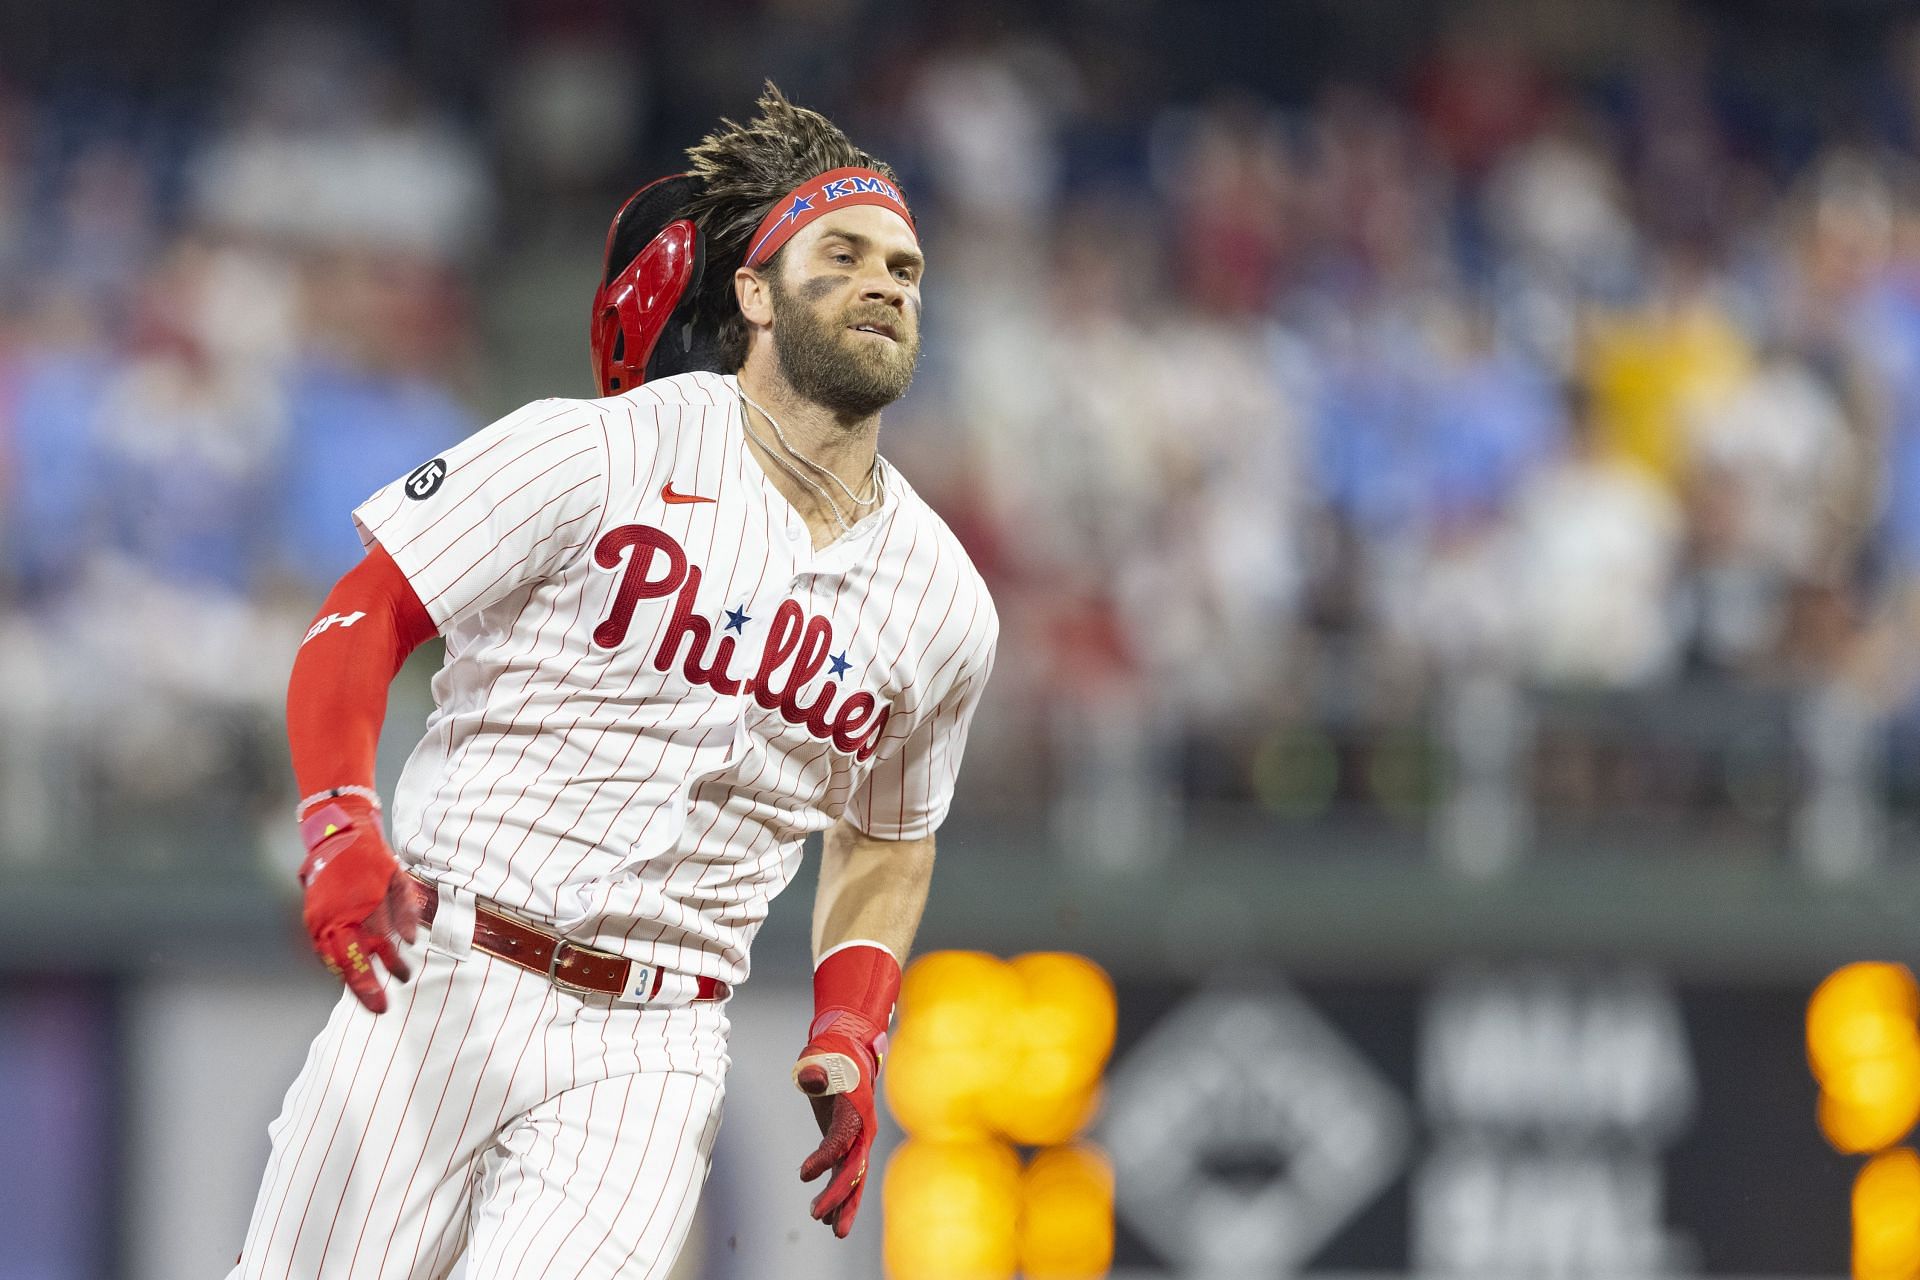 Phillies fans used to hate Bryce Harper. Now in the World Series